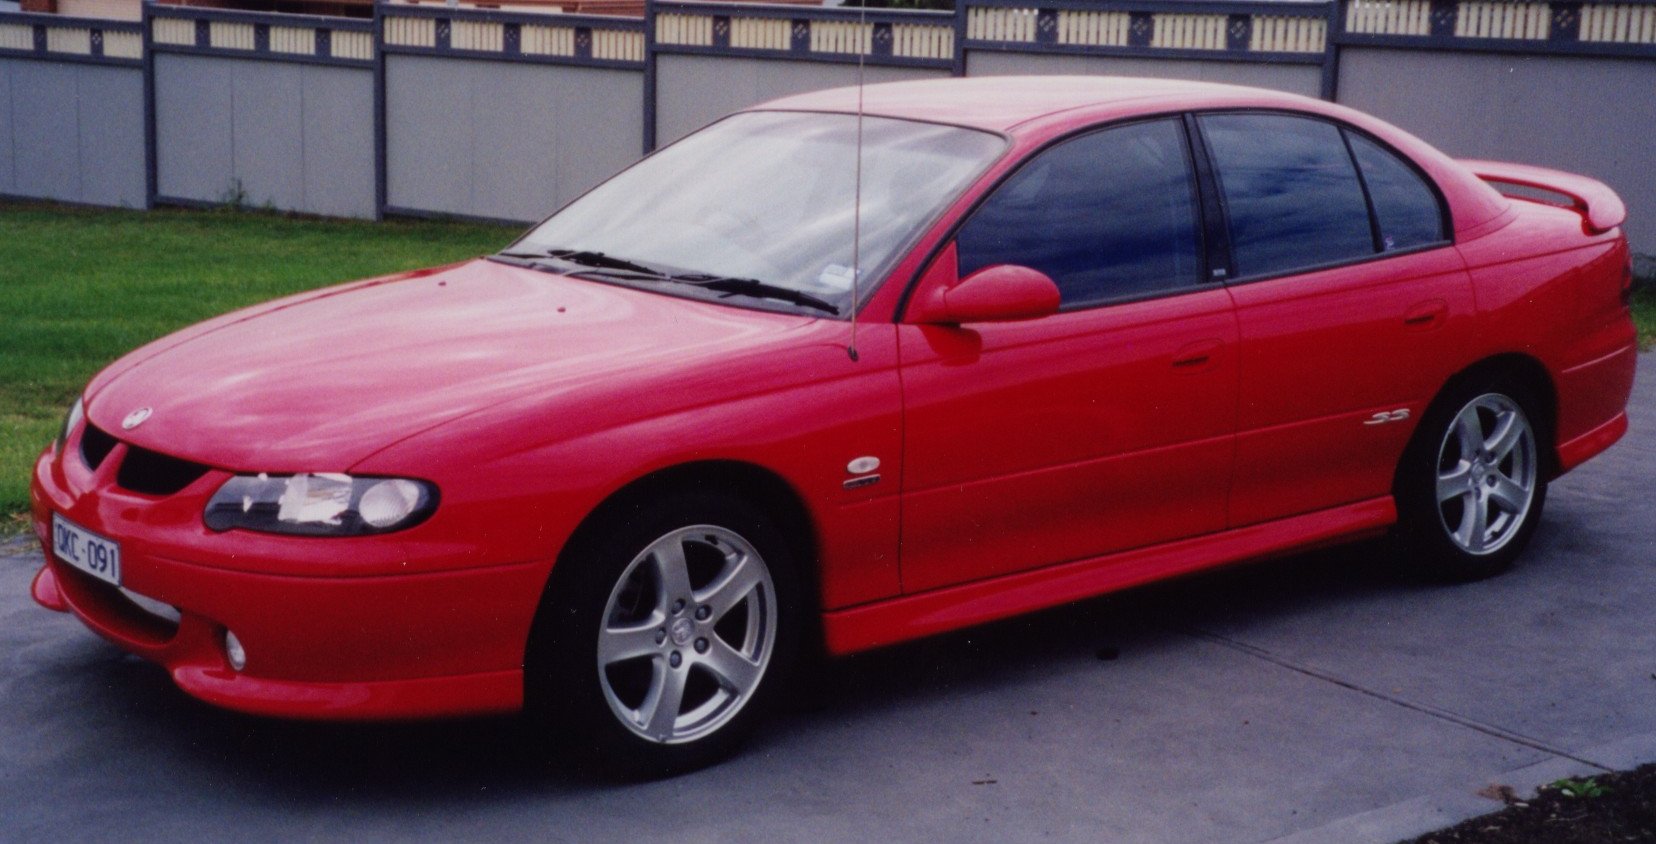 2000 VX Holden Commodore SS